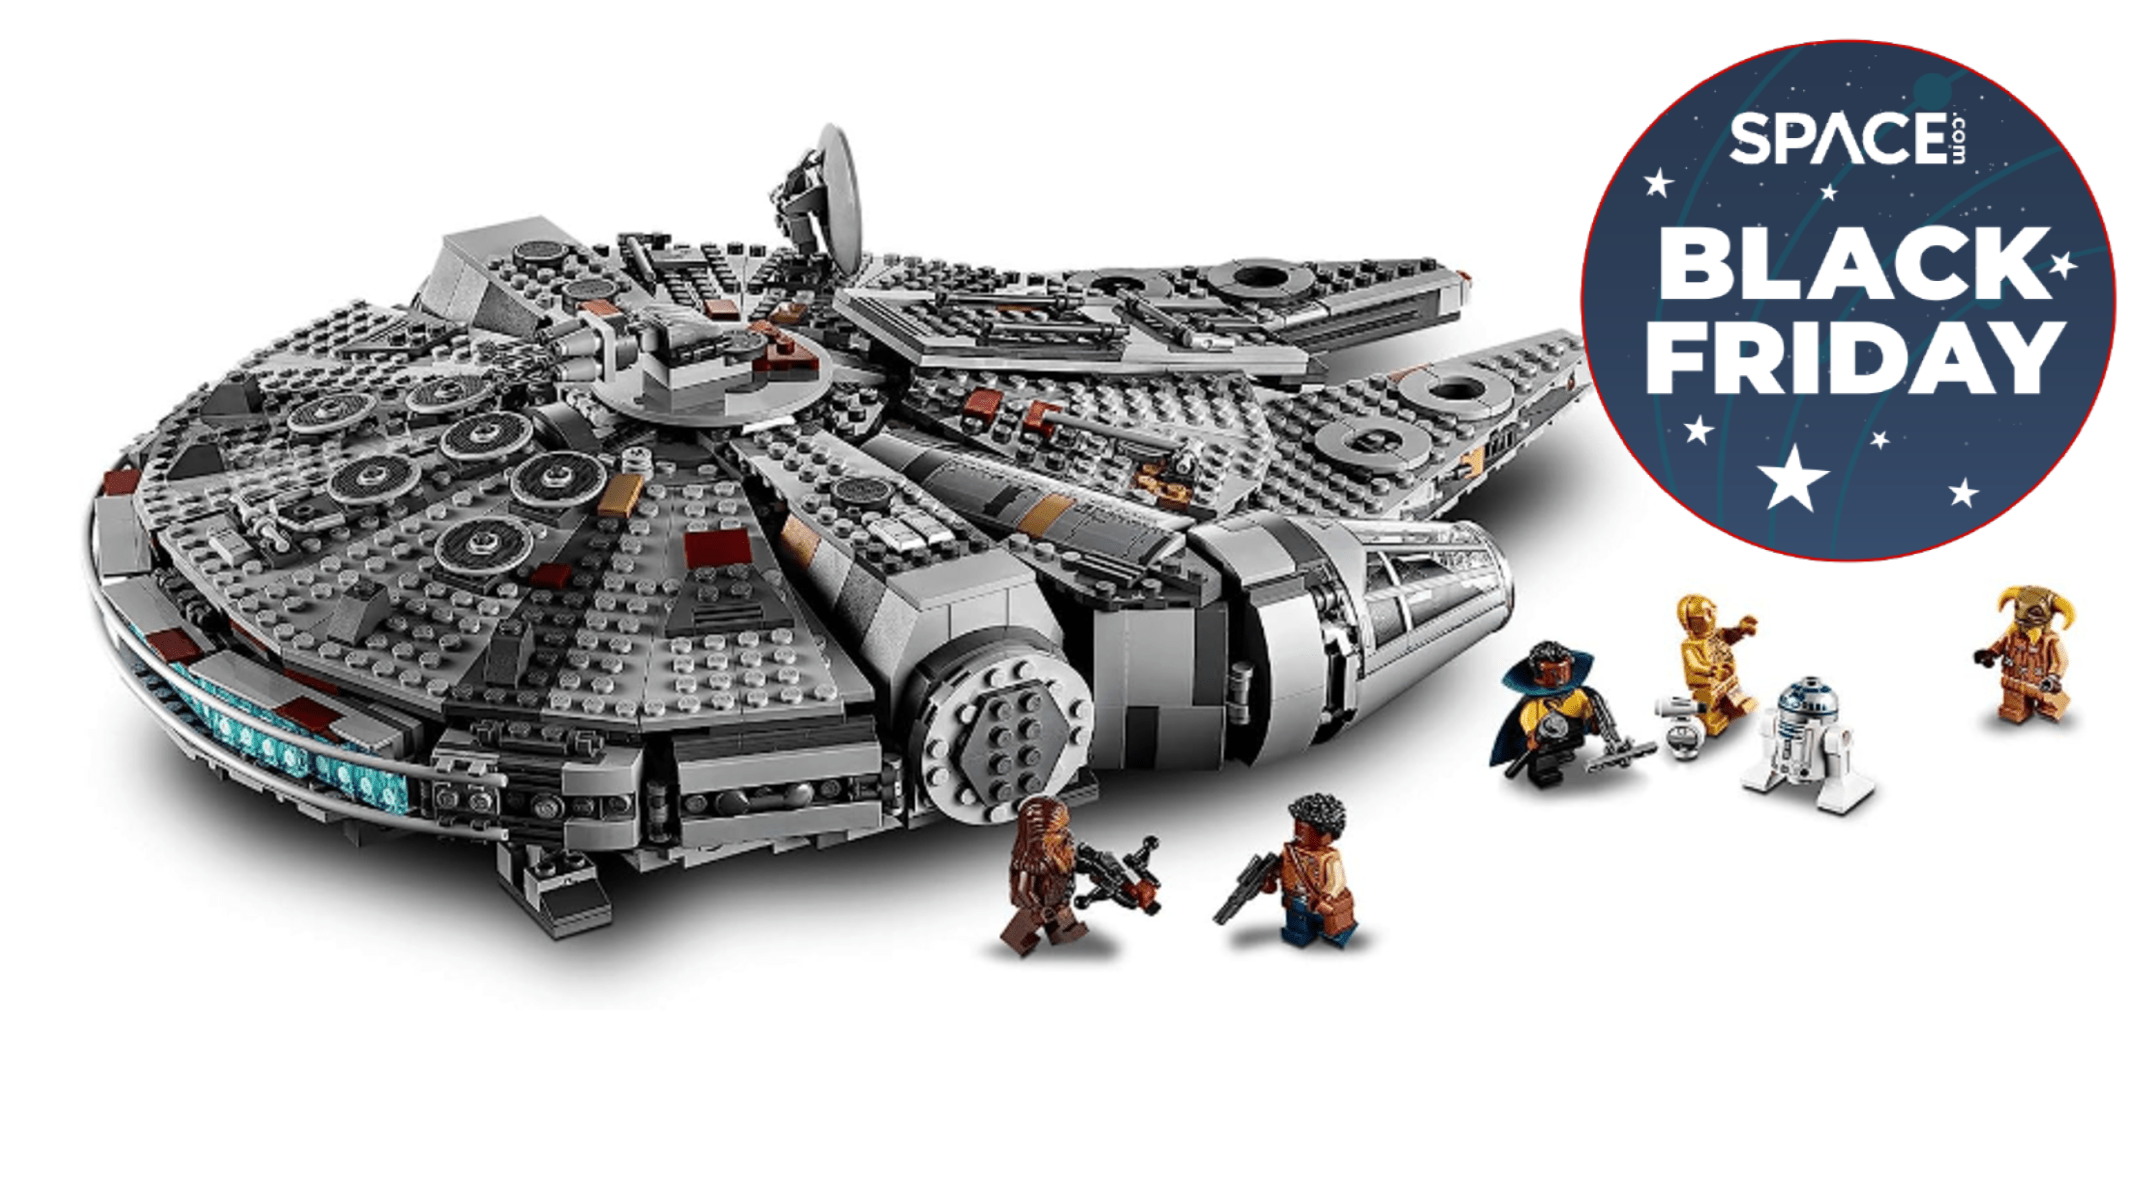 Save 20% on the Lego Star Wars Millennium Falcon set this Cyber